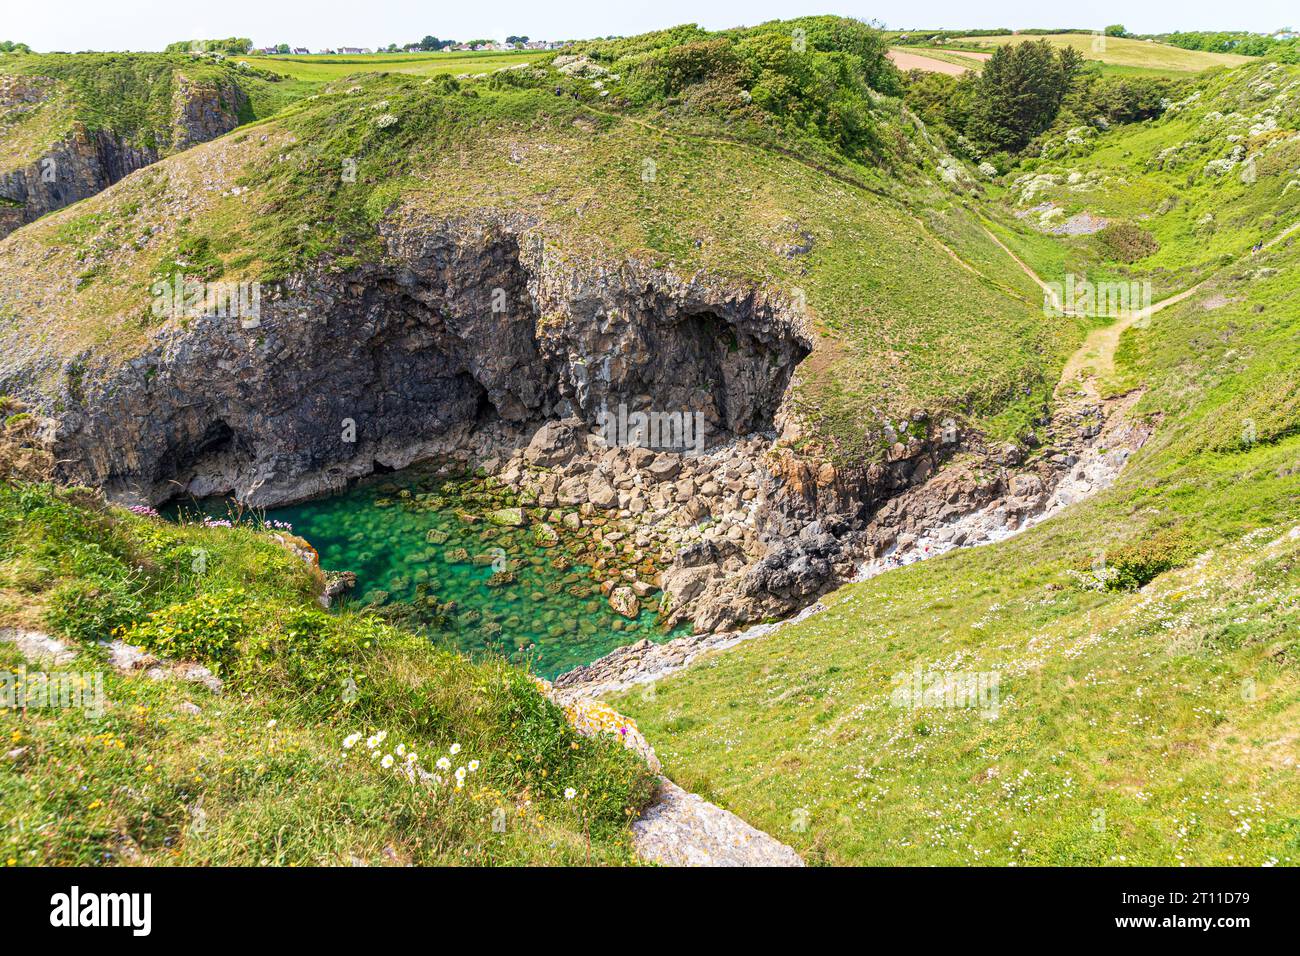 Skrinkle Haven, Lydstep in the Pembrokeshire Coast National Park, West Wales UK Stock Photo